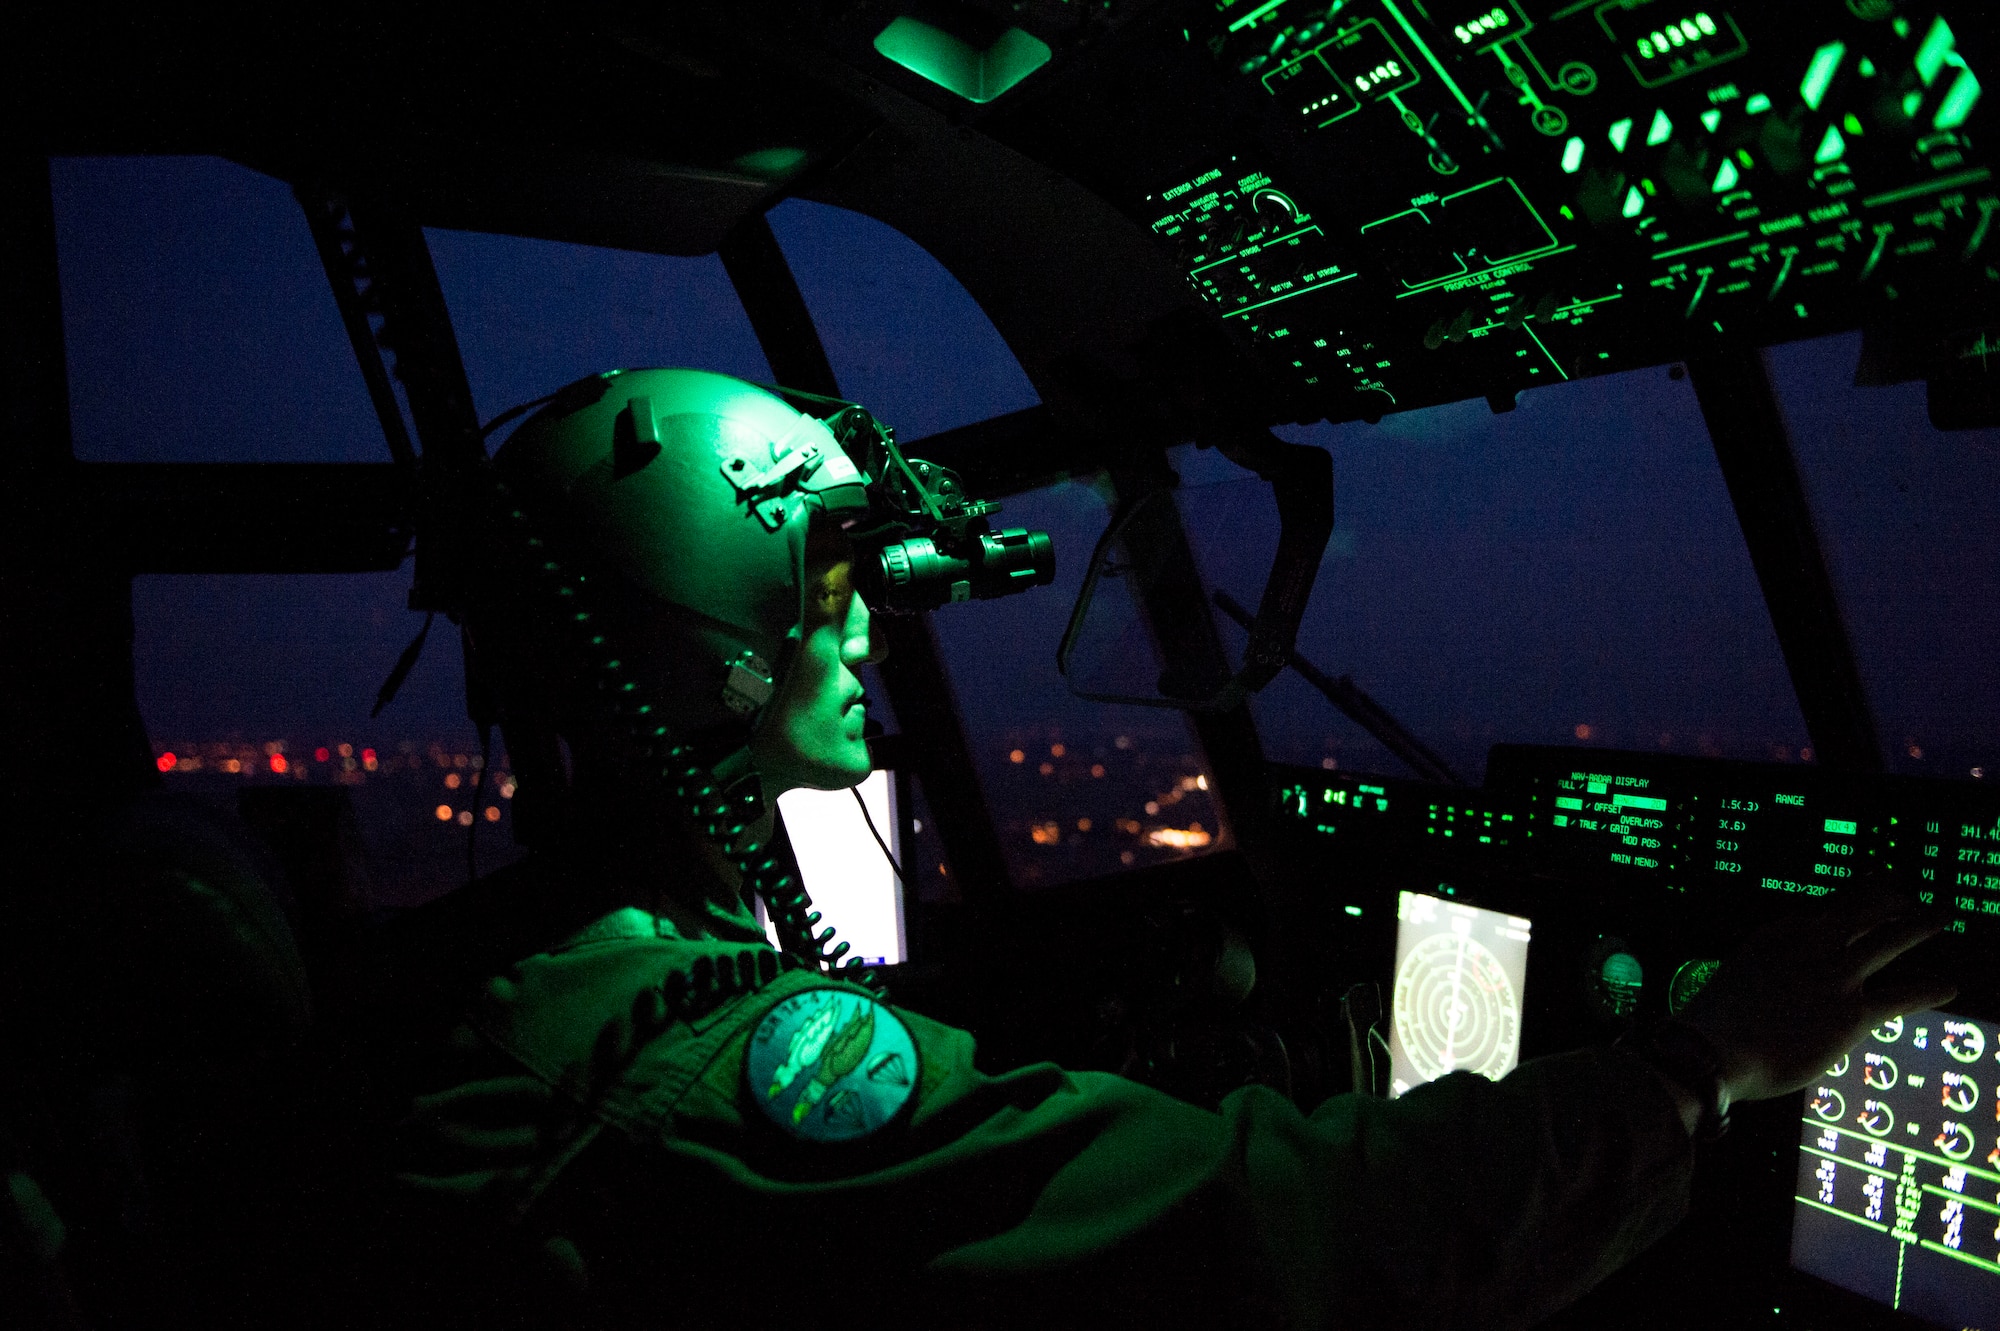 U.S. Air Force Capt. Leland Quinter, 37th Airlift Squadron C-130J Super Hercules pilot, wears night vision goggles during a training flight over Poland Aug. 2, 2018. U.S. C-130J pilots train to fly in multiple complex scenarios in various atmospheric conditions. (U.S. Air Force photo by Senior Airman Joshua Magbanua)